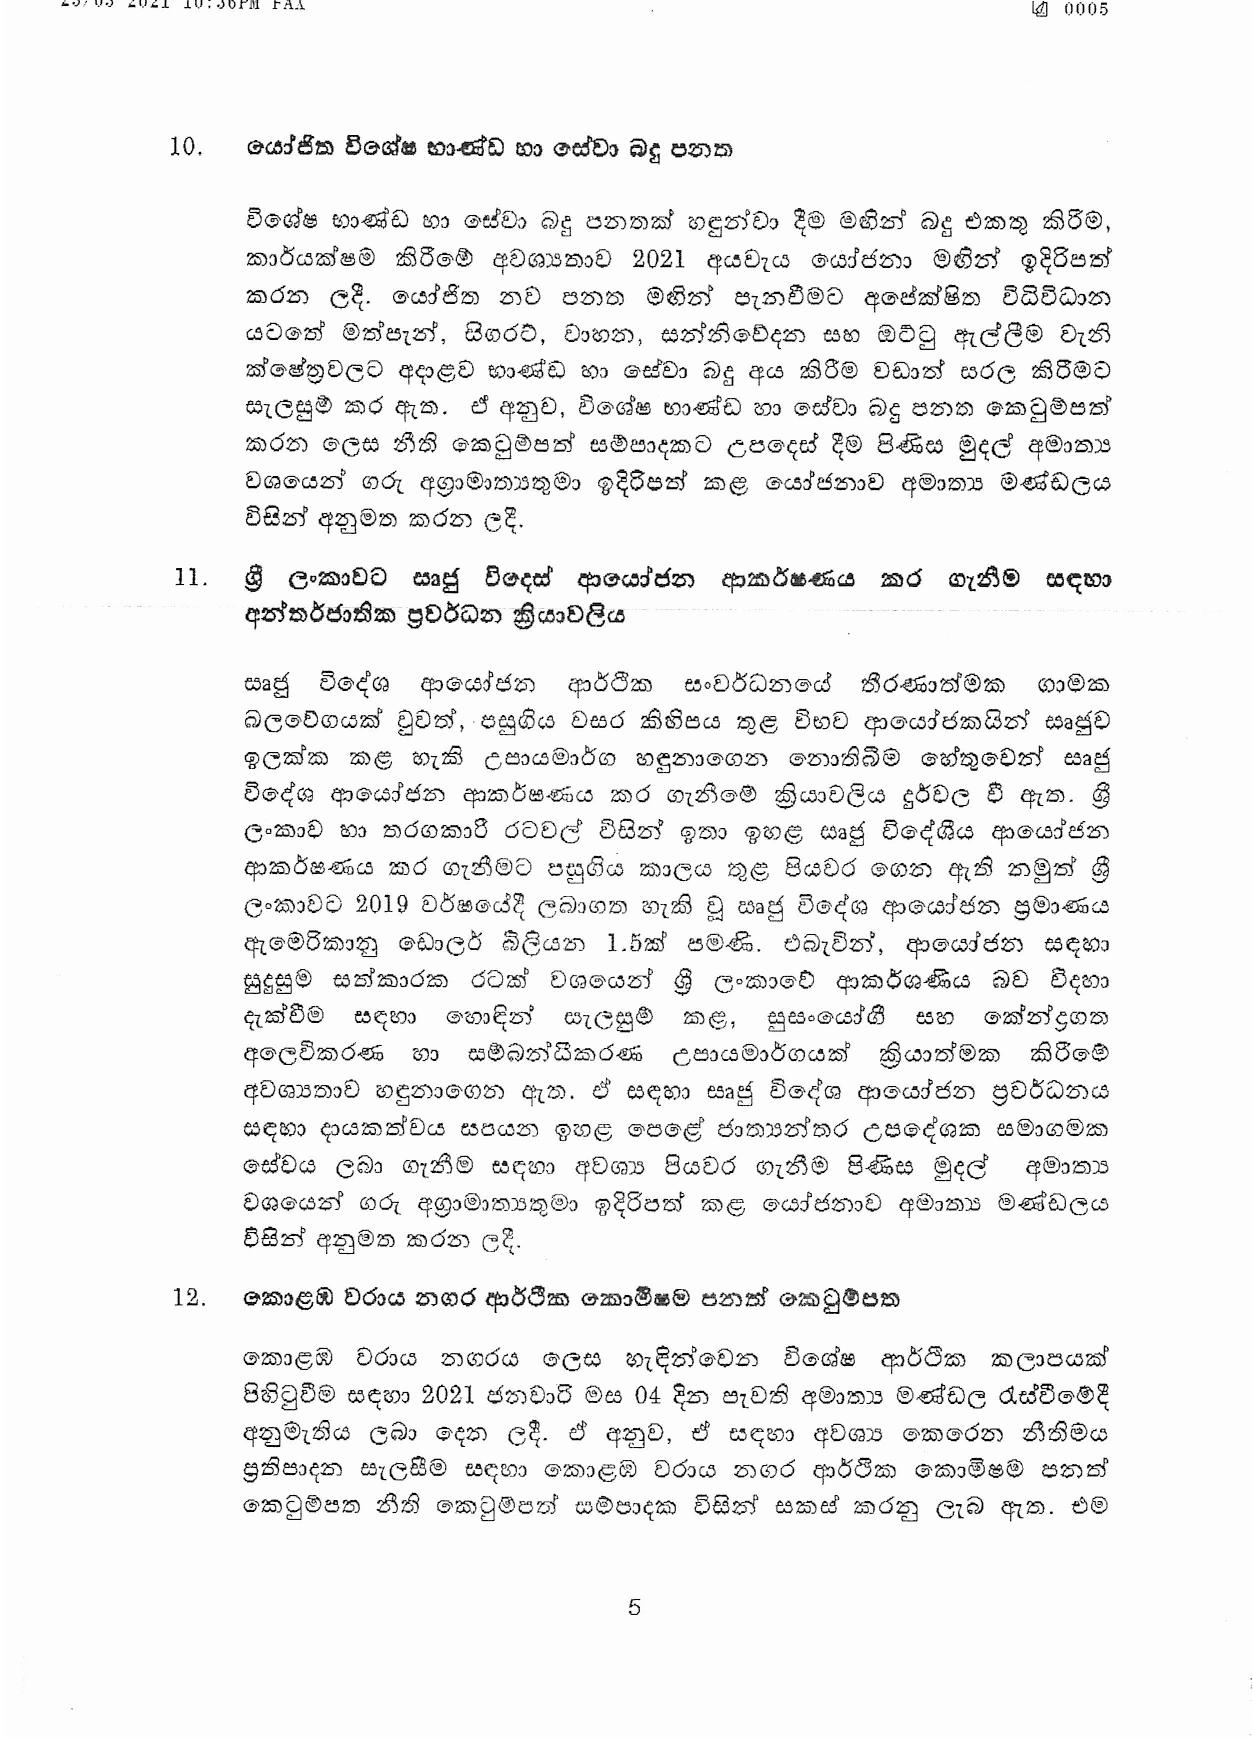 Cabinet Decision on 23.03.2021 page 005